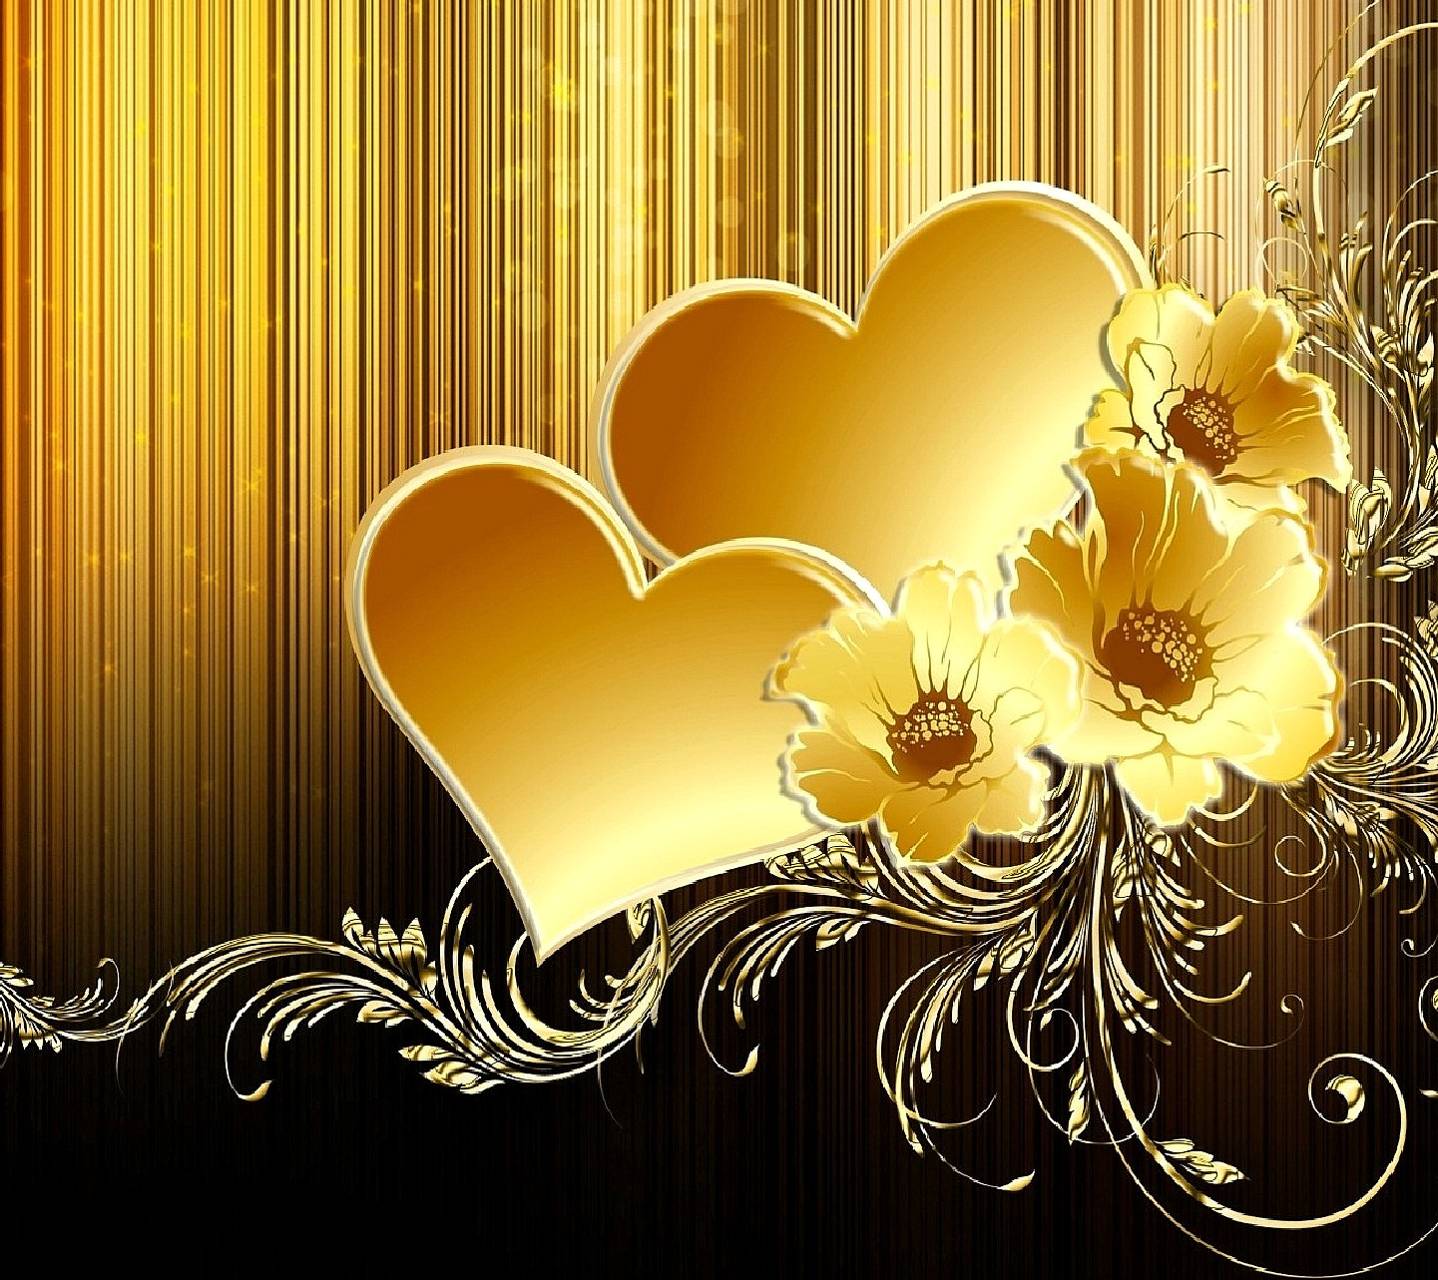 3d Gold Heart With Reflection In The Sea Background Wallpaper Gold Heart  Love Background Image And Wallpaper for Free Download